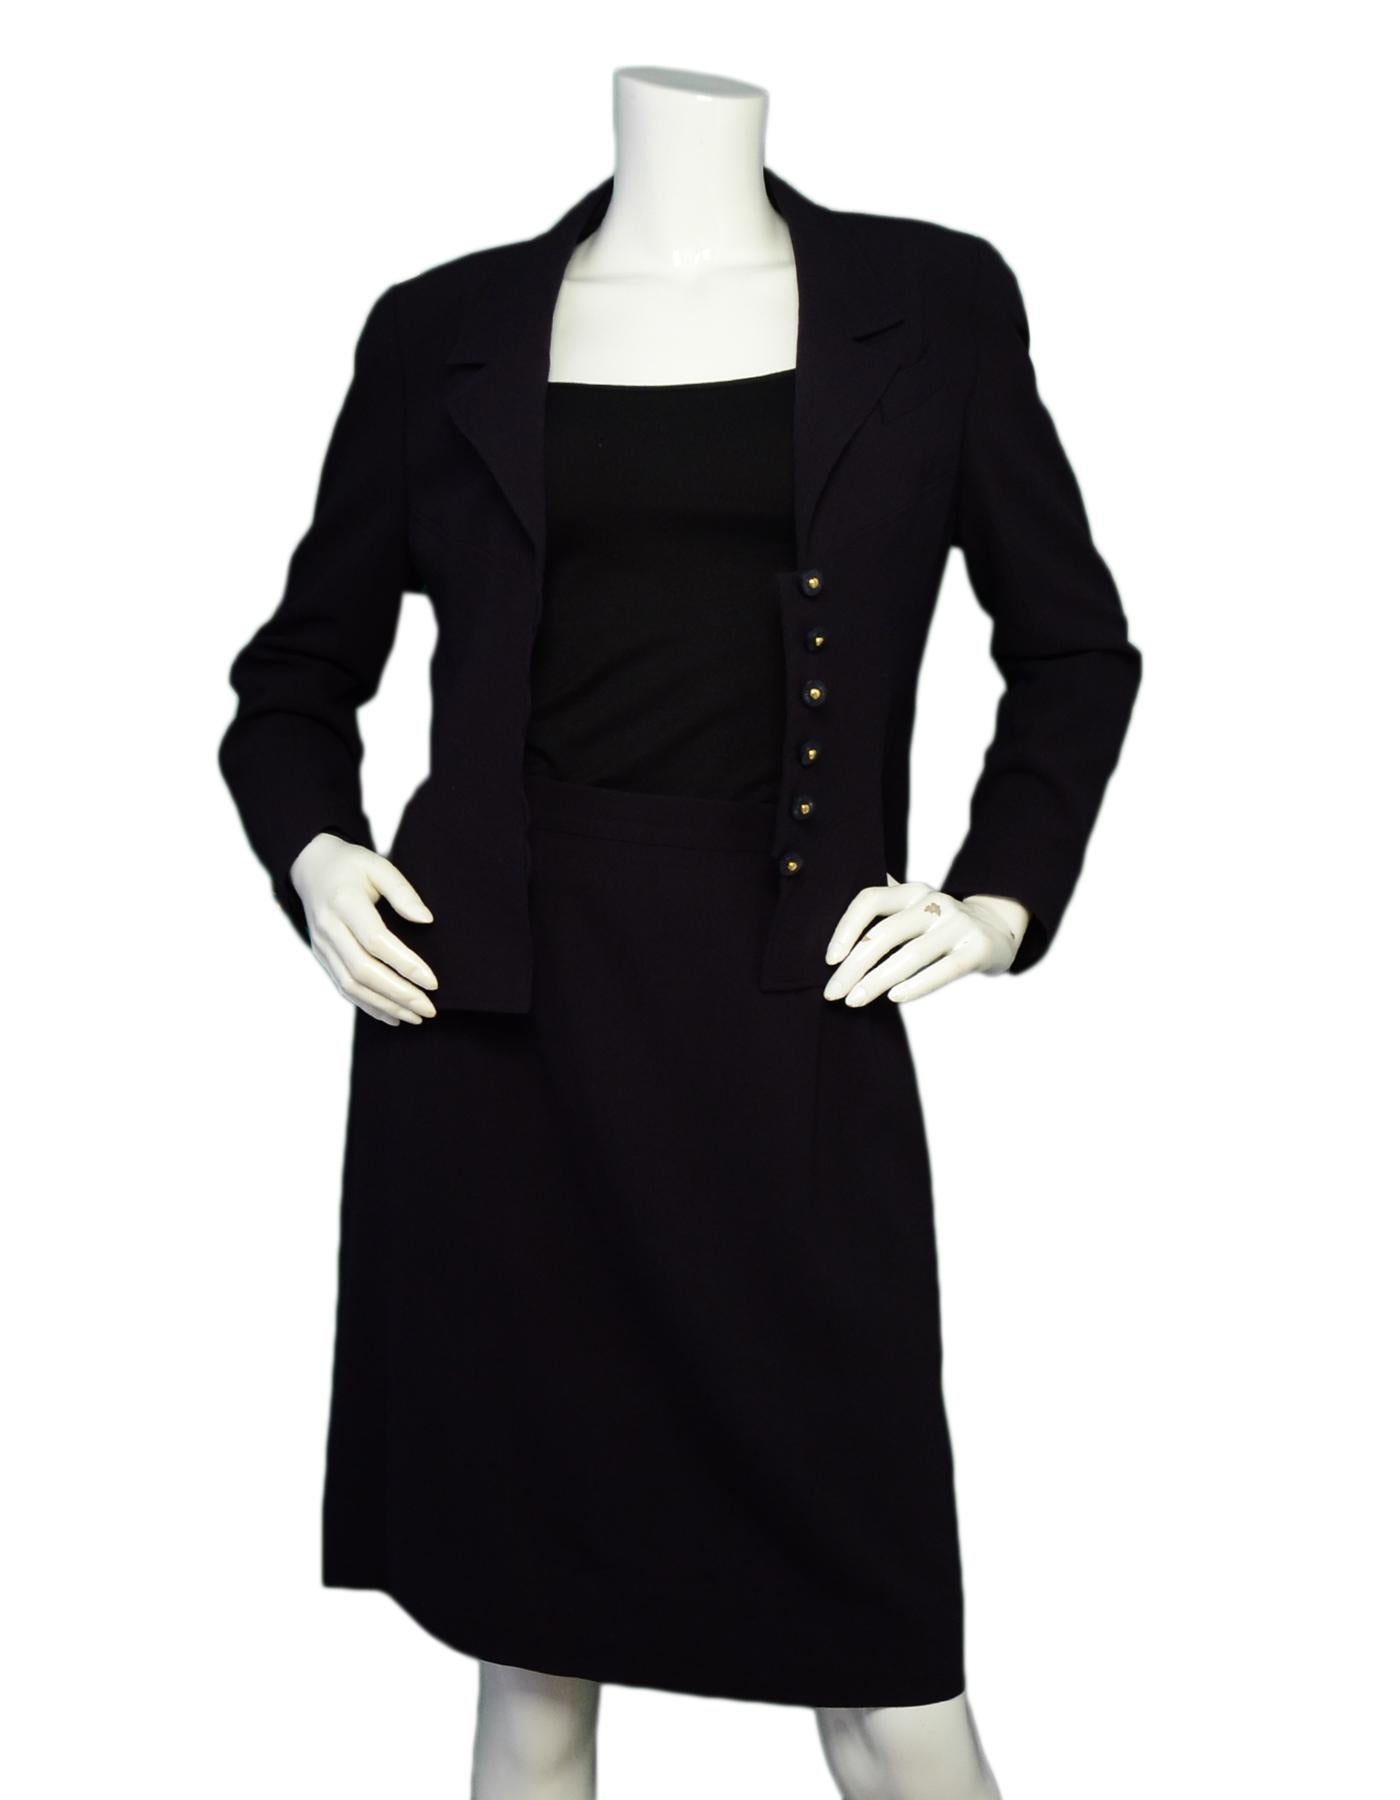 Chanel Navy Two-Piece Wool Skirt Suit 

Color: Navy
Materials: 100% wool
Lining: 95% silk, 5% lycra
Opening/Closure: Front button closures (jacket), Hidden back zipper (skirt)
Overall Condition: Excellent pre-owned condition, with the exception of